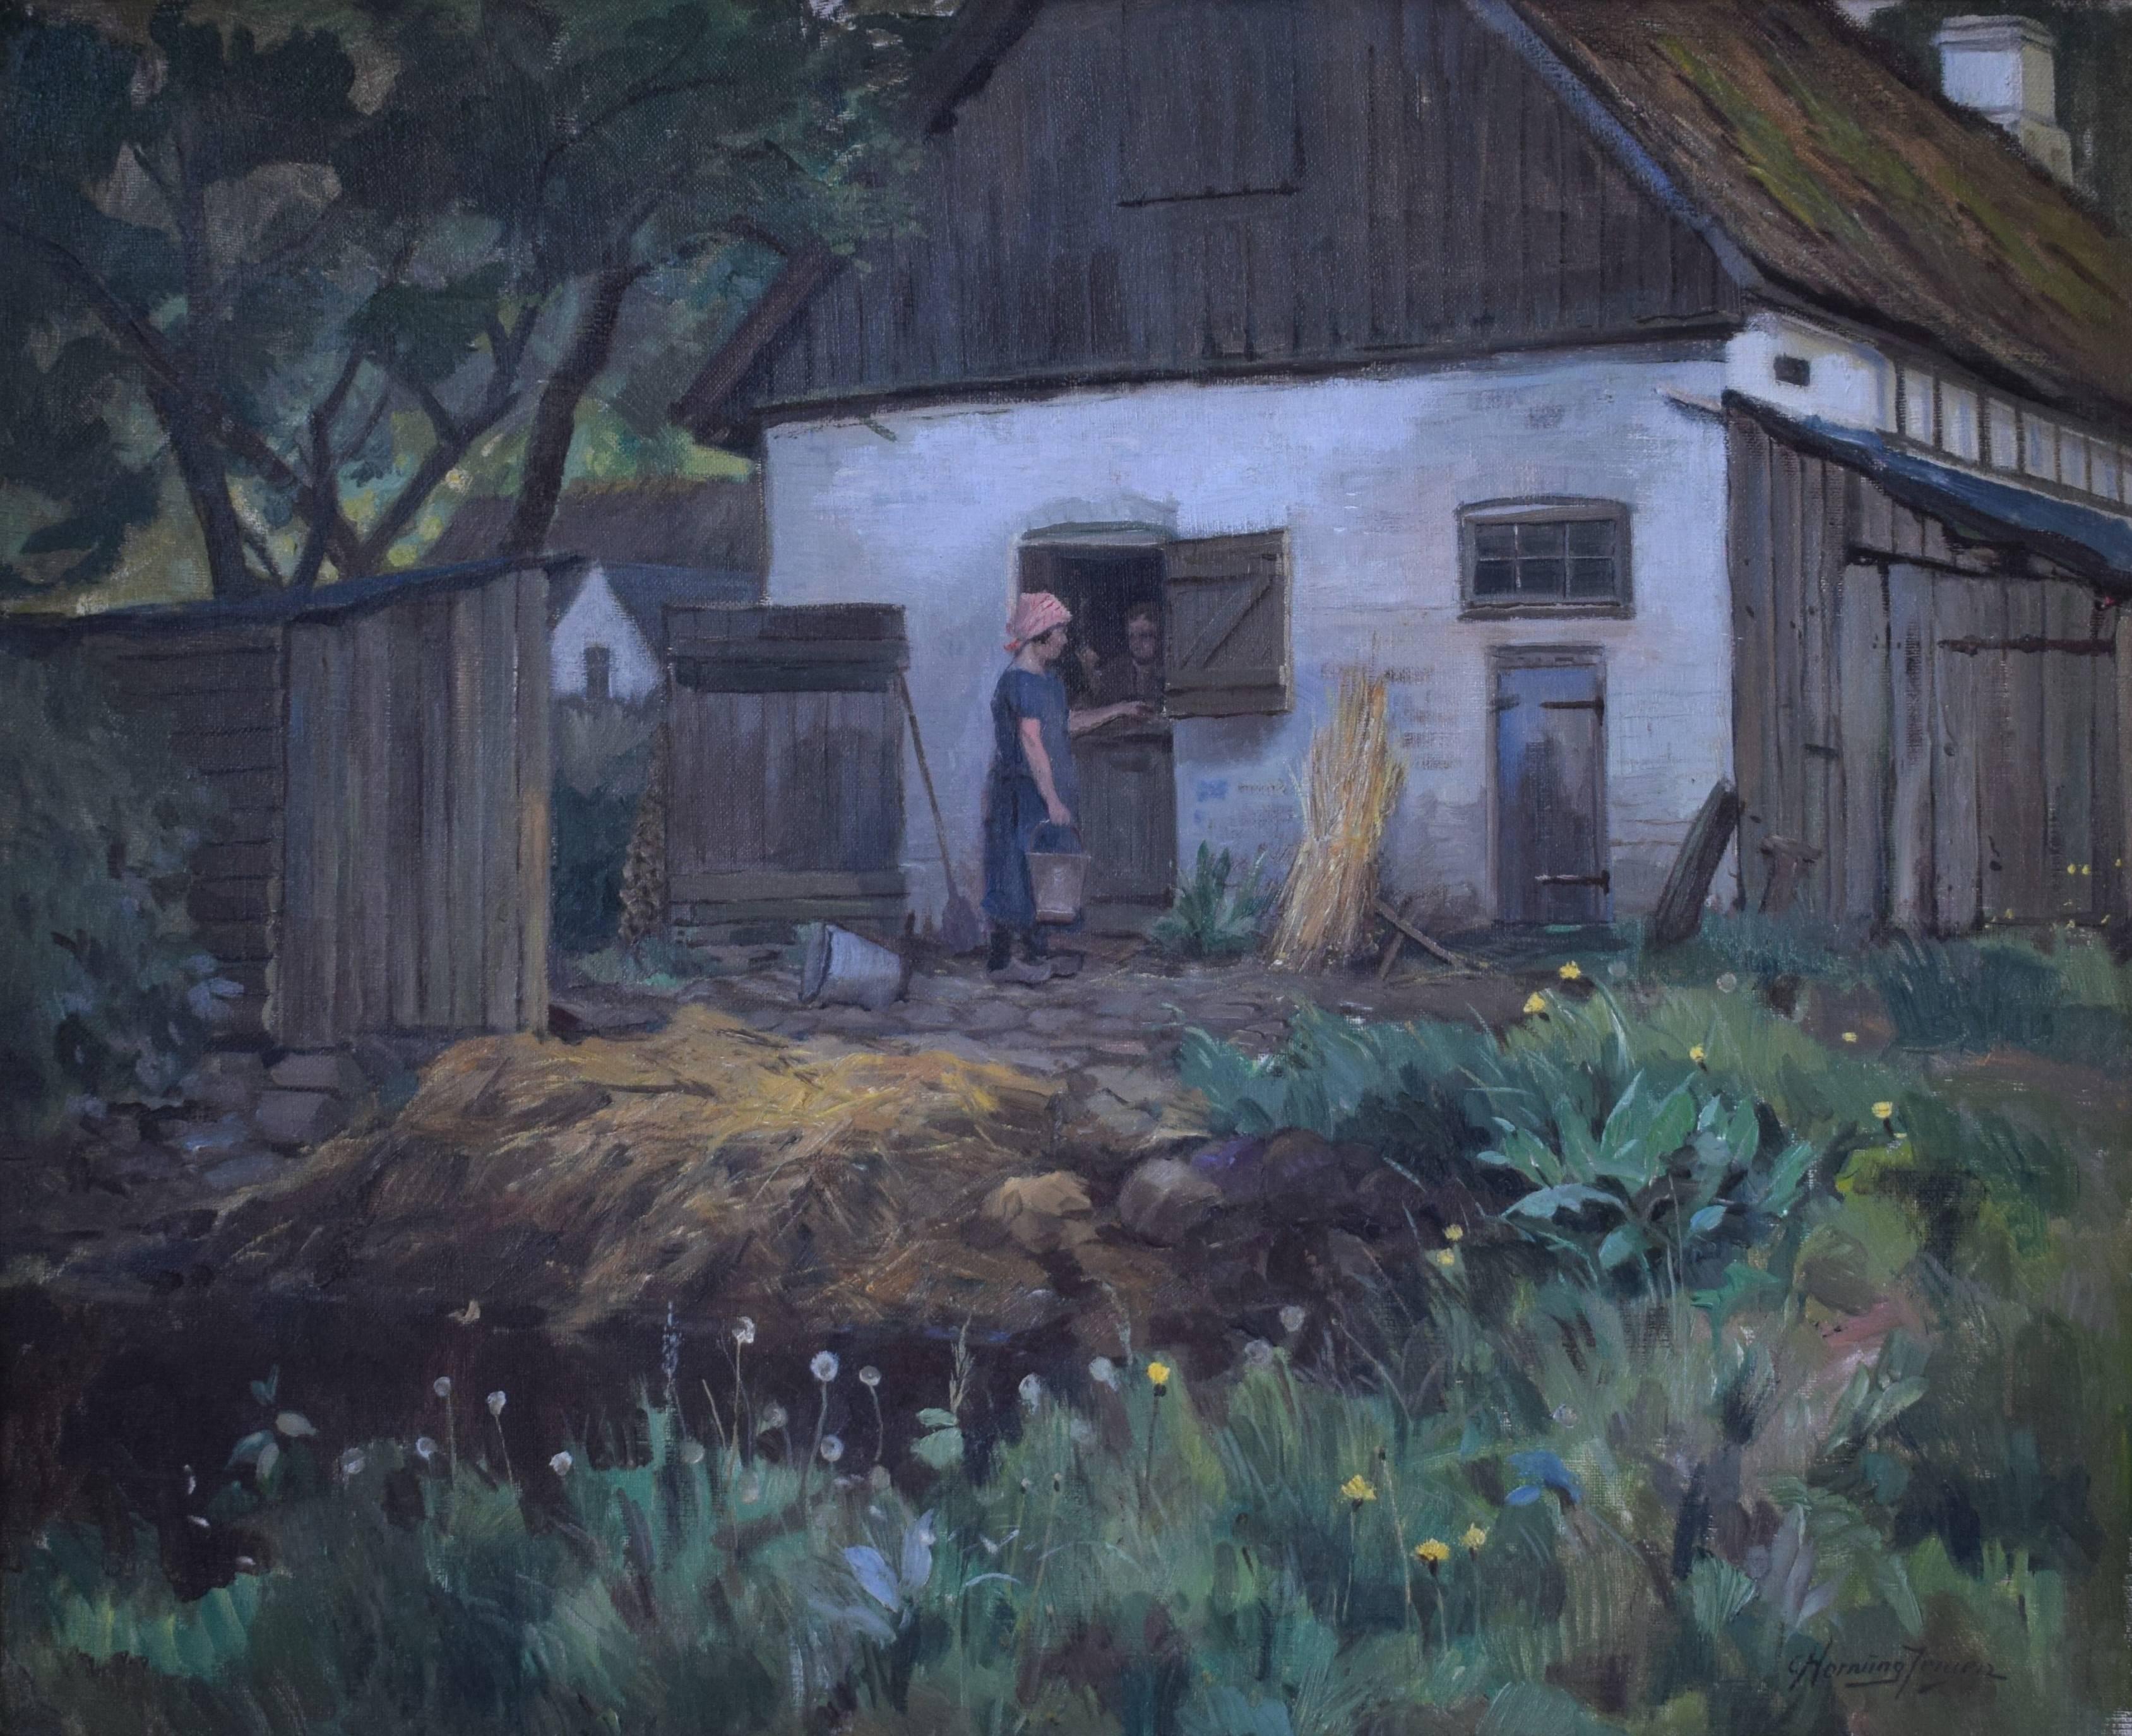 A young couple at the stabile door on a Danish farm by the Danish painter Carlo Hornung-Jensen (1882-1960). Oil on canvas, circa 1920.
Dimensions: in 25 H x in 29.5 W x in 2.6 D / cm 63.5 H x cm 75 W x cm 6.5 D.